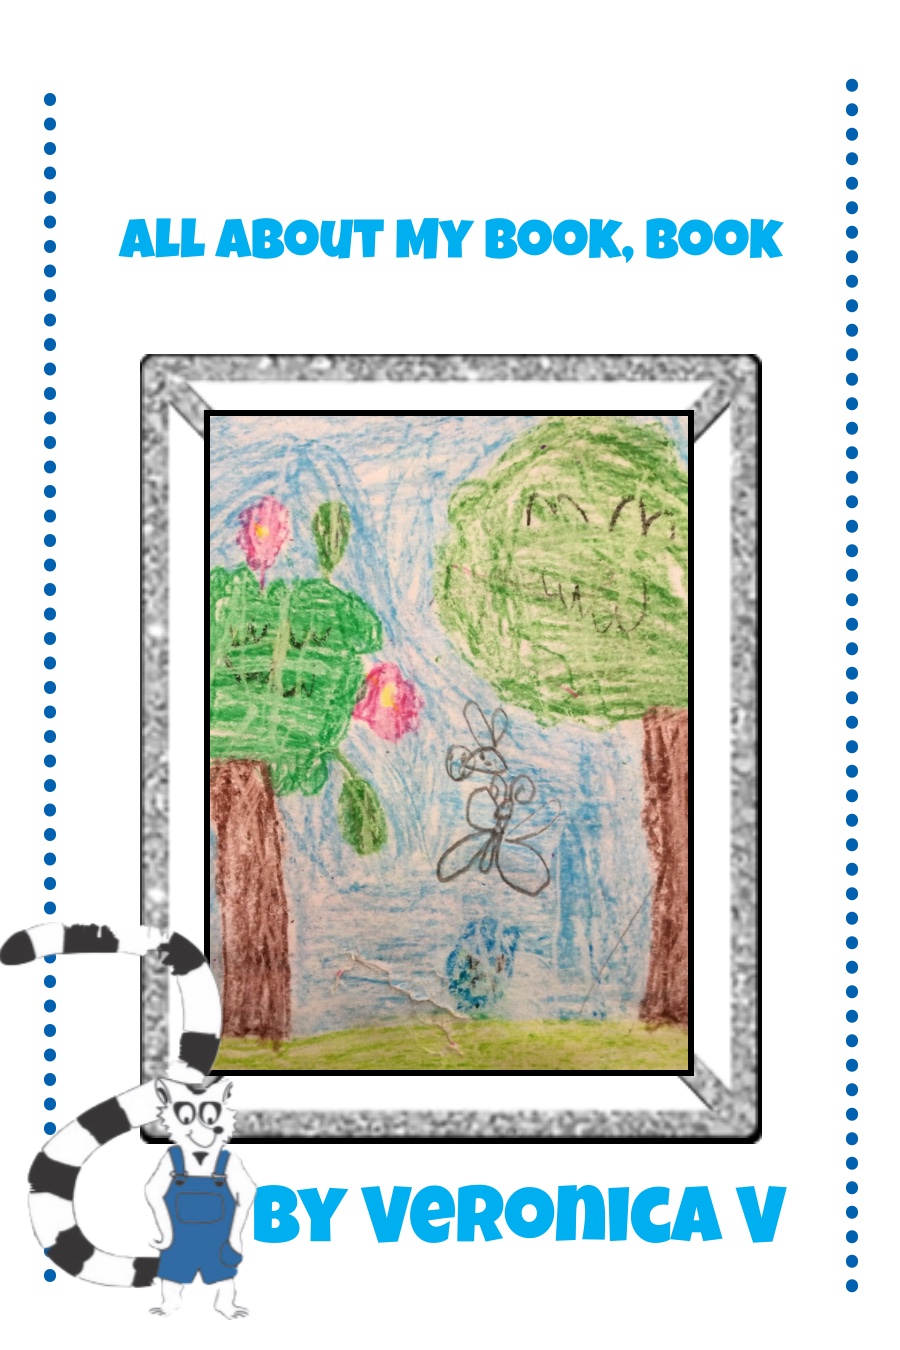 All About Me Book Veronica V